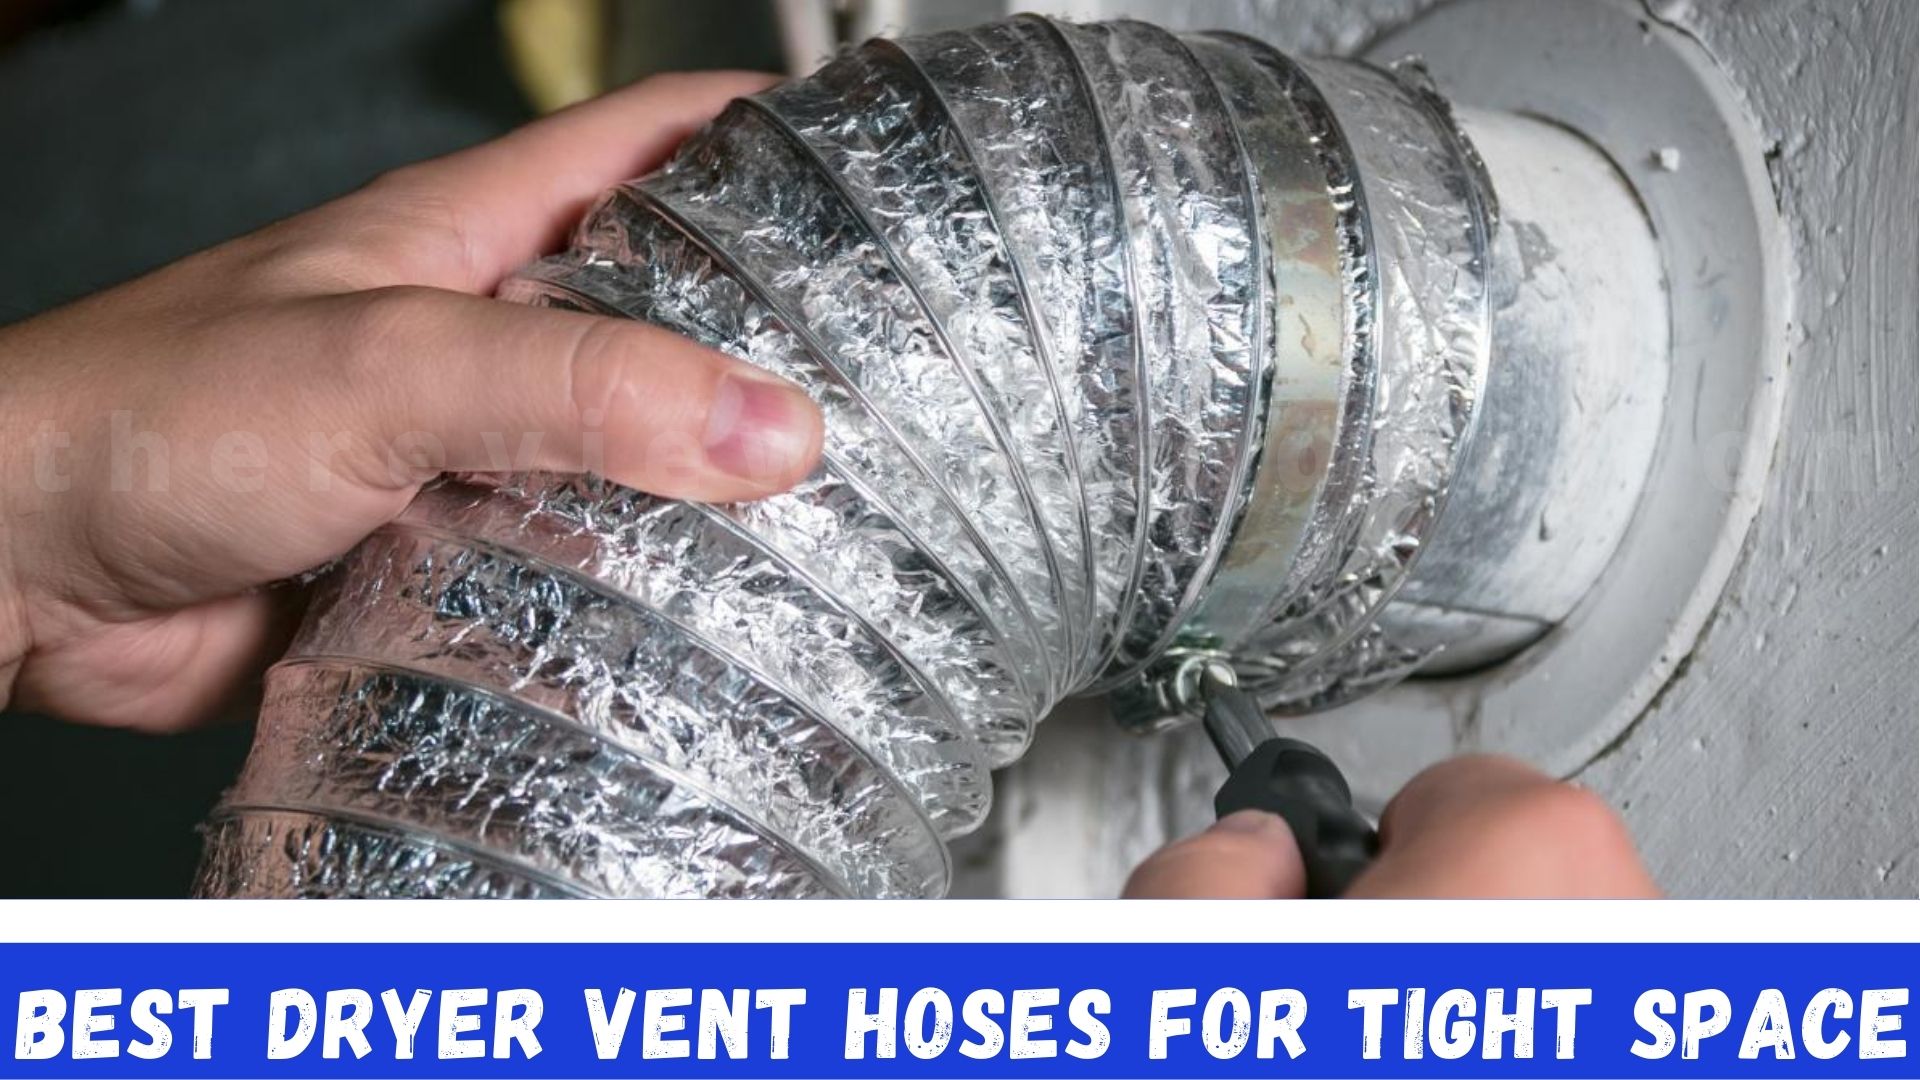 7 Best Dryer Vent Hose For Tight Space In 2021